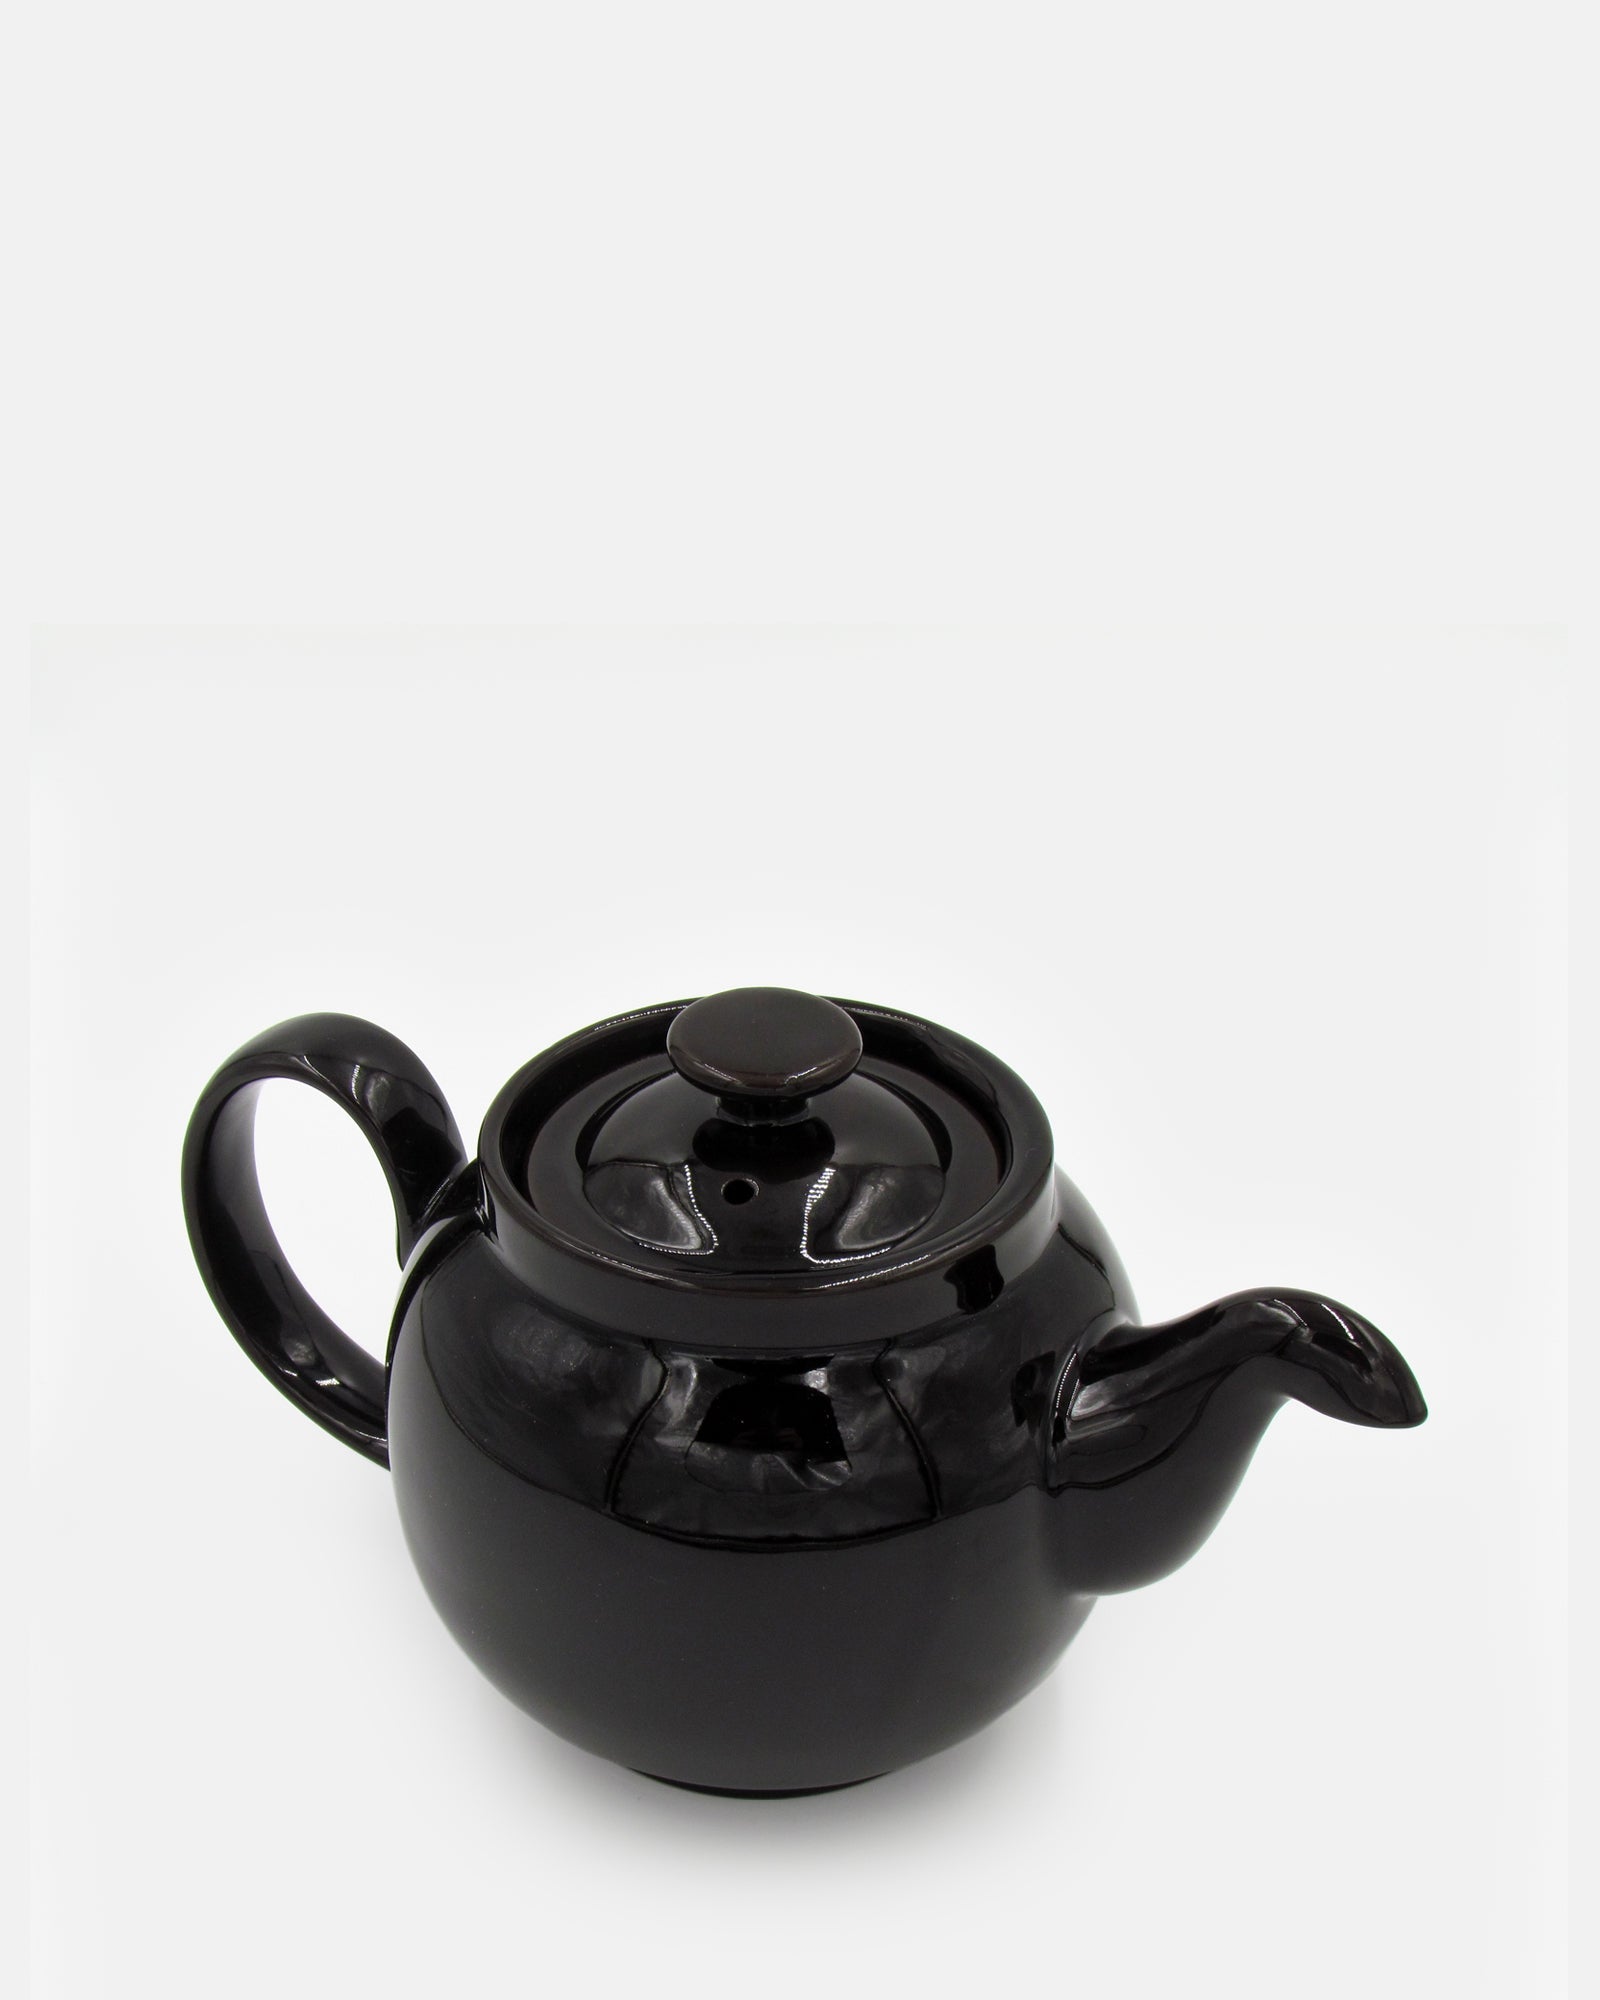 Brown Betty Re-engineered 4 Cup Teapot with Infuser - BRIT LOCKER